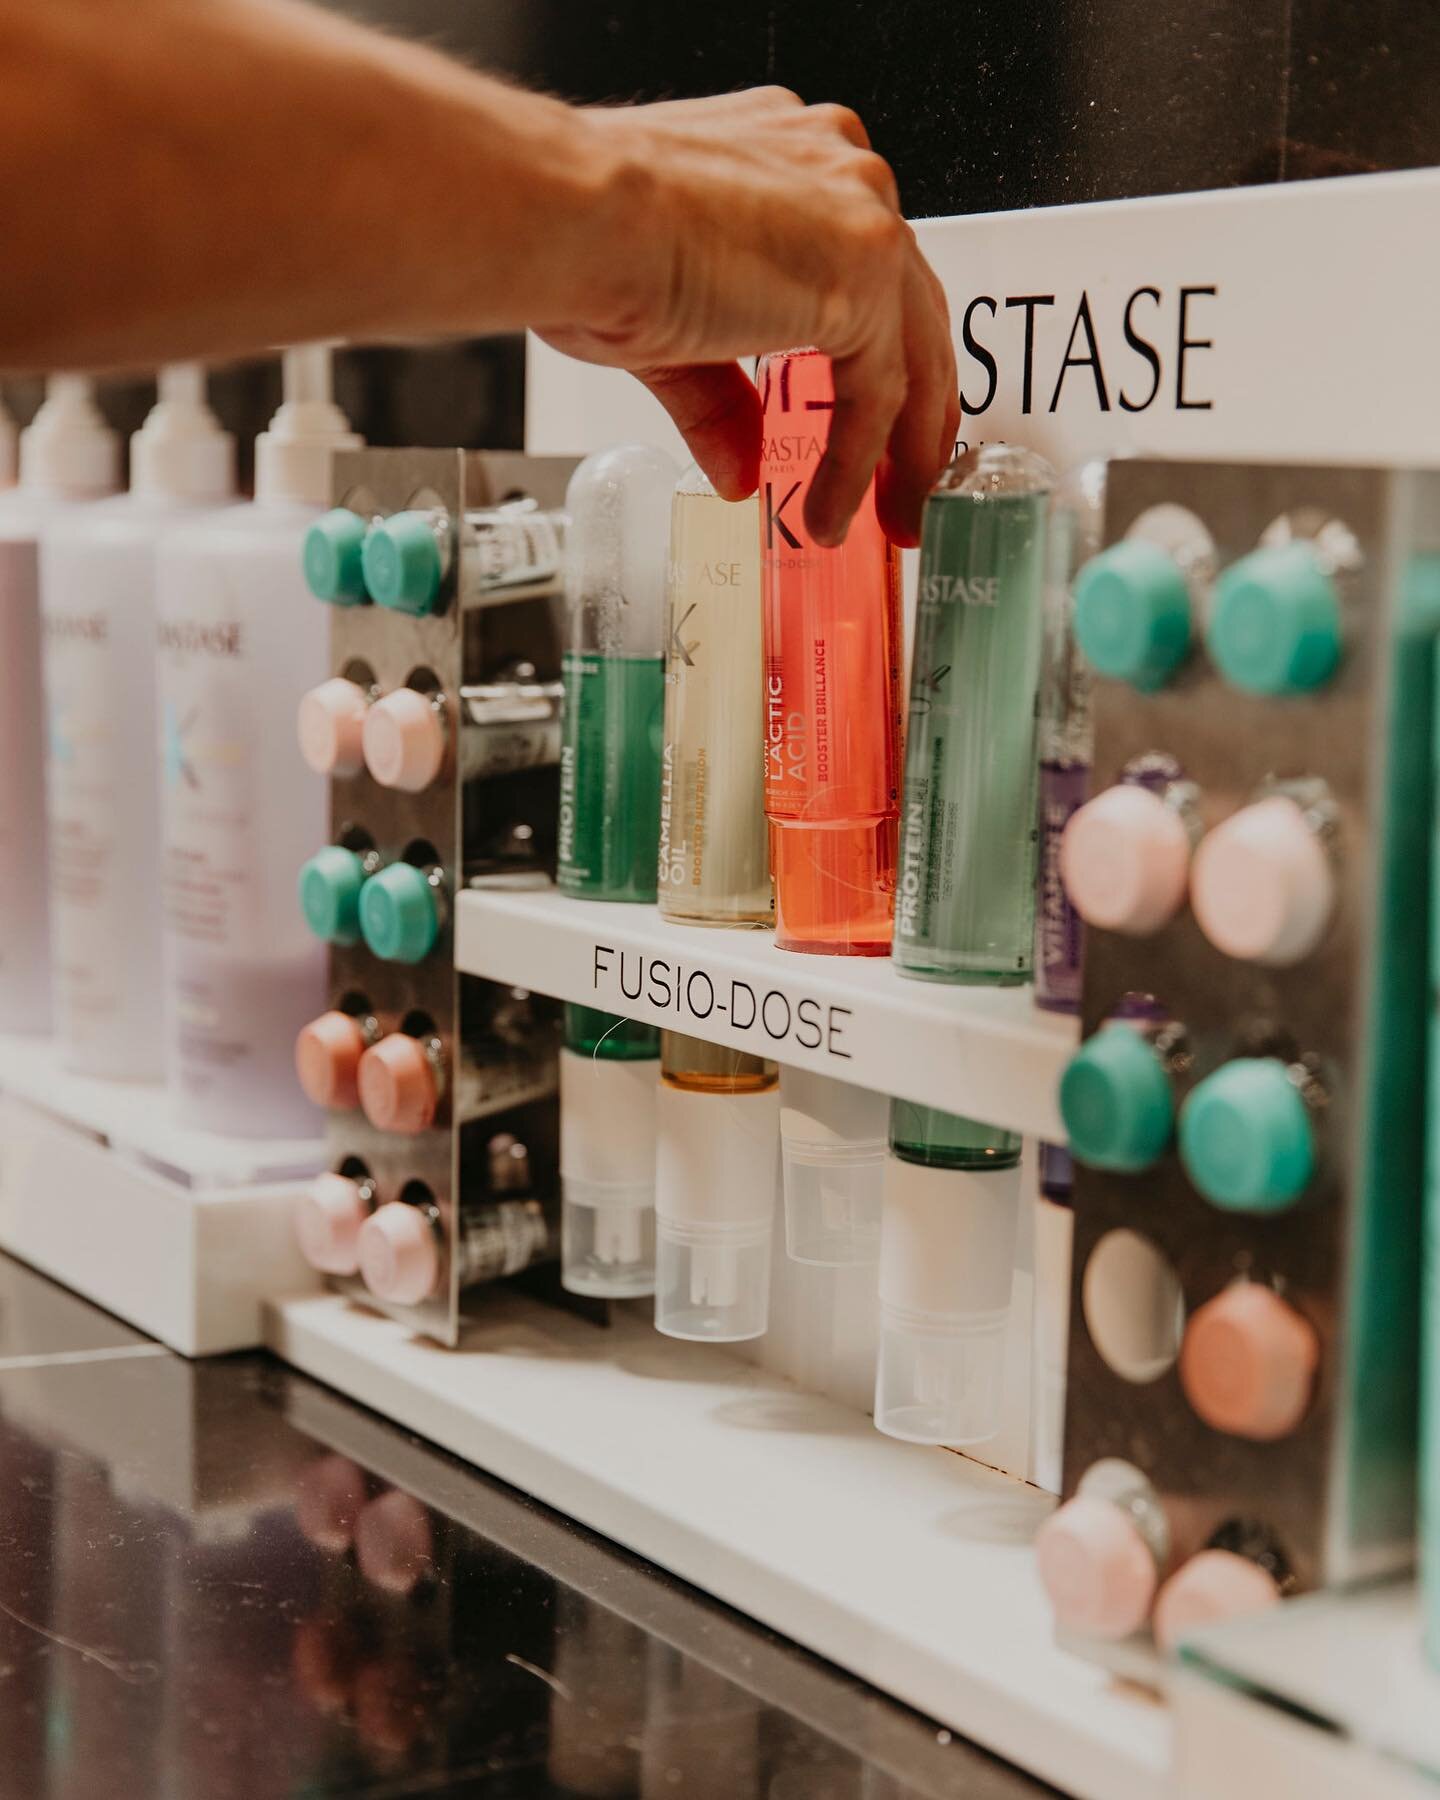 Indulge in a Luxury Hair Experience with Fusio Dose! ✨ At AP Luxe in Mill Valley, we offer the ultimate hair transformation with up to 30 unique combinations of Fusio Dose treatments. Our expert Kerastase stylists are here to address your hair concer